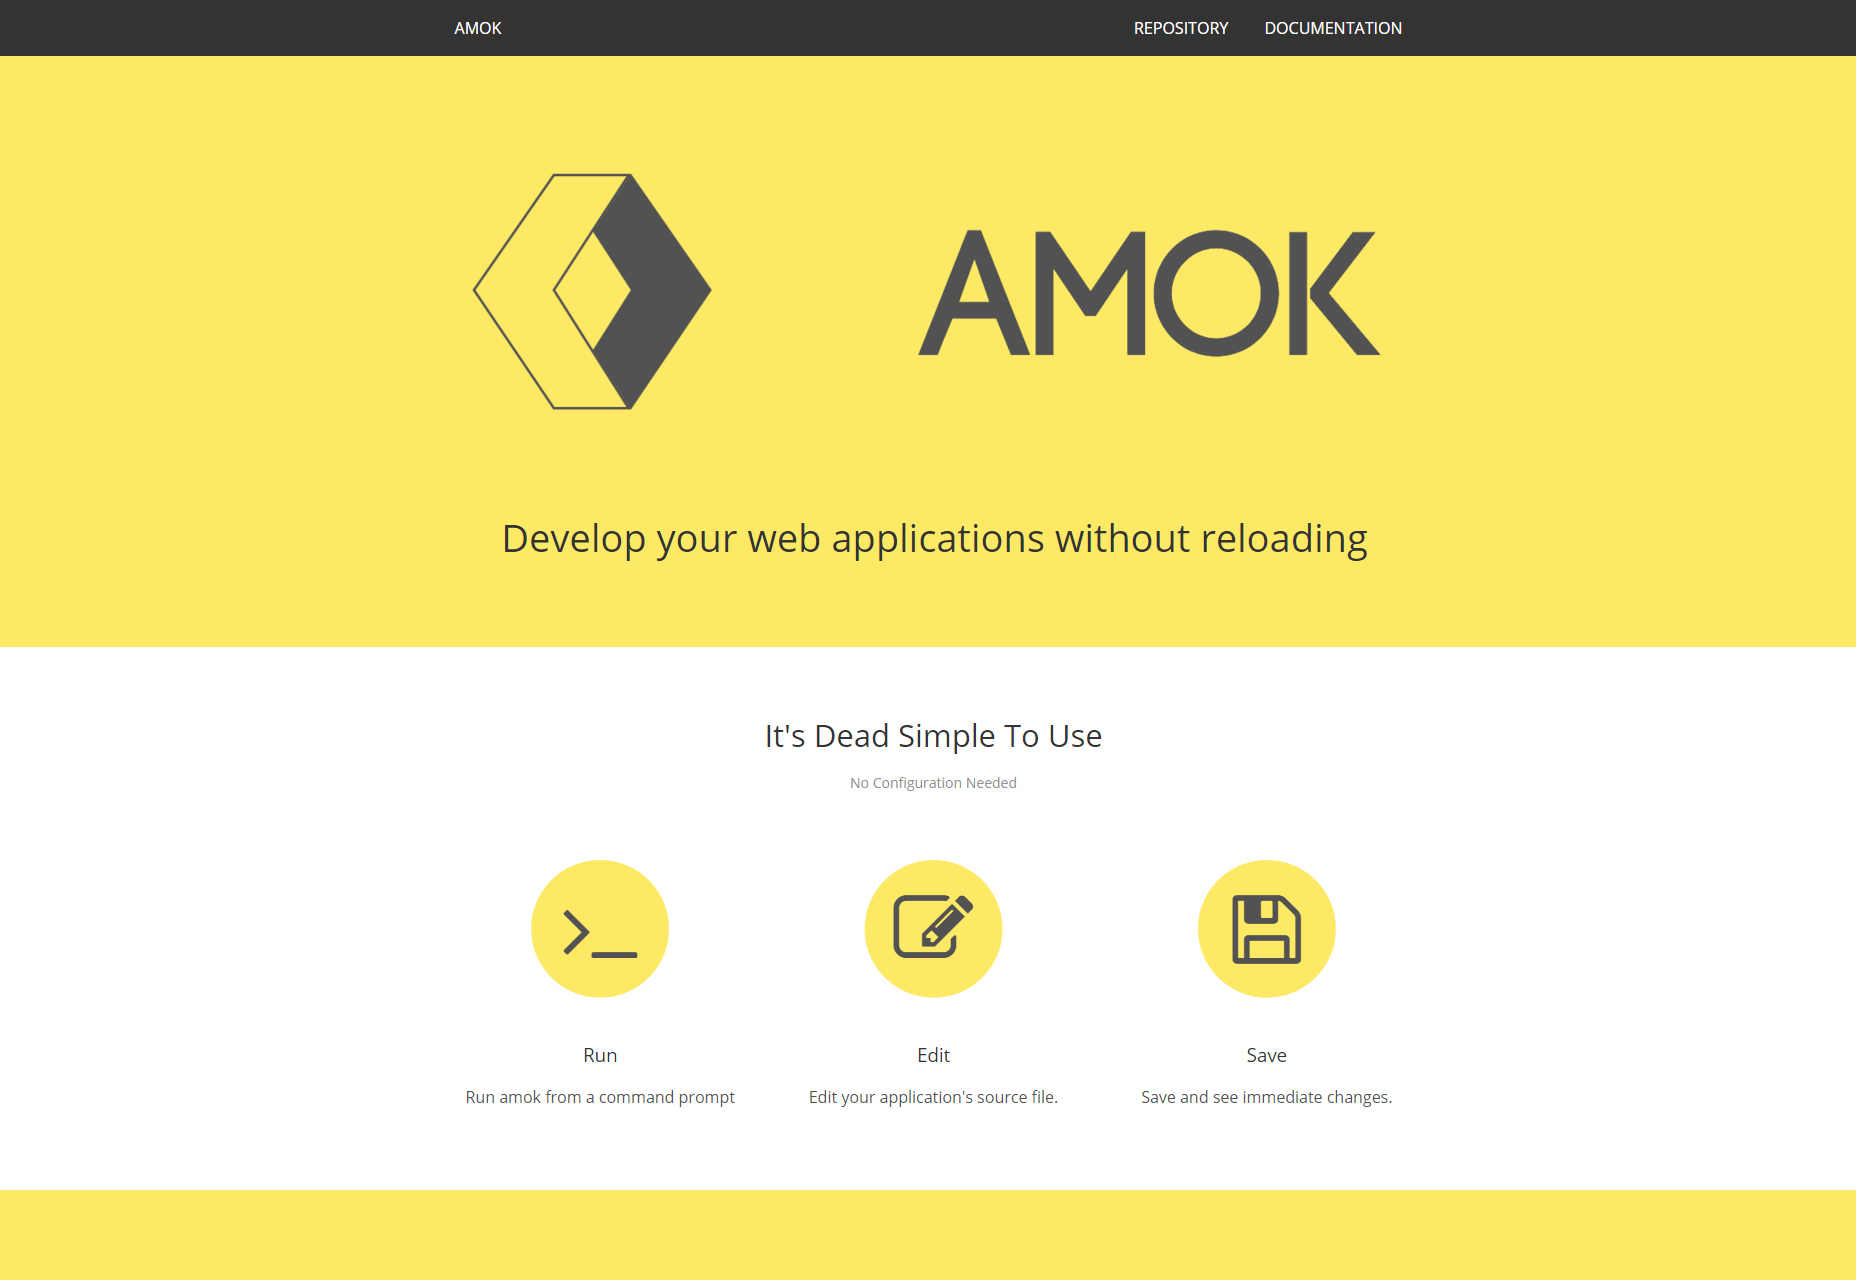 amok-develop-your-web-application-without-reloading